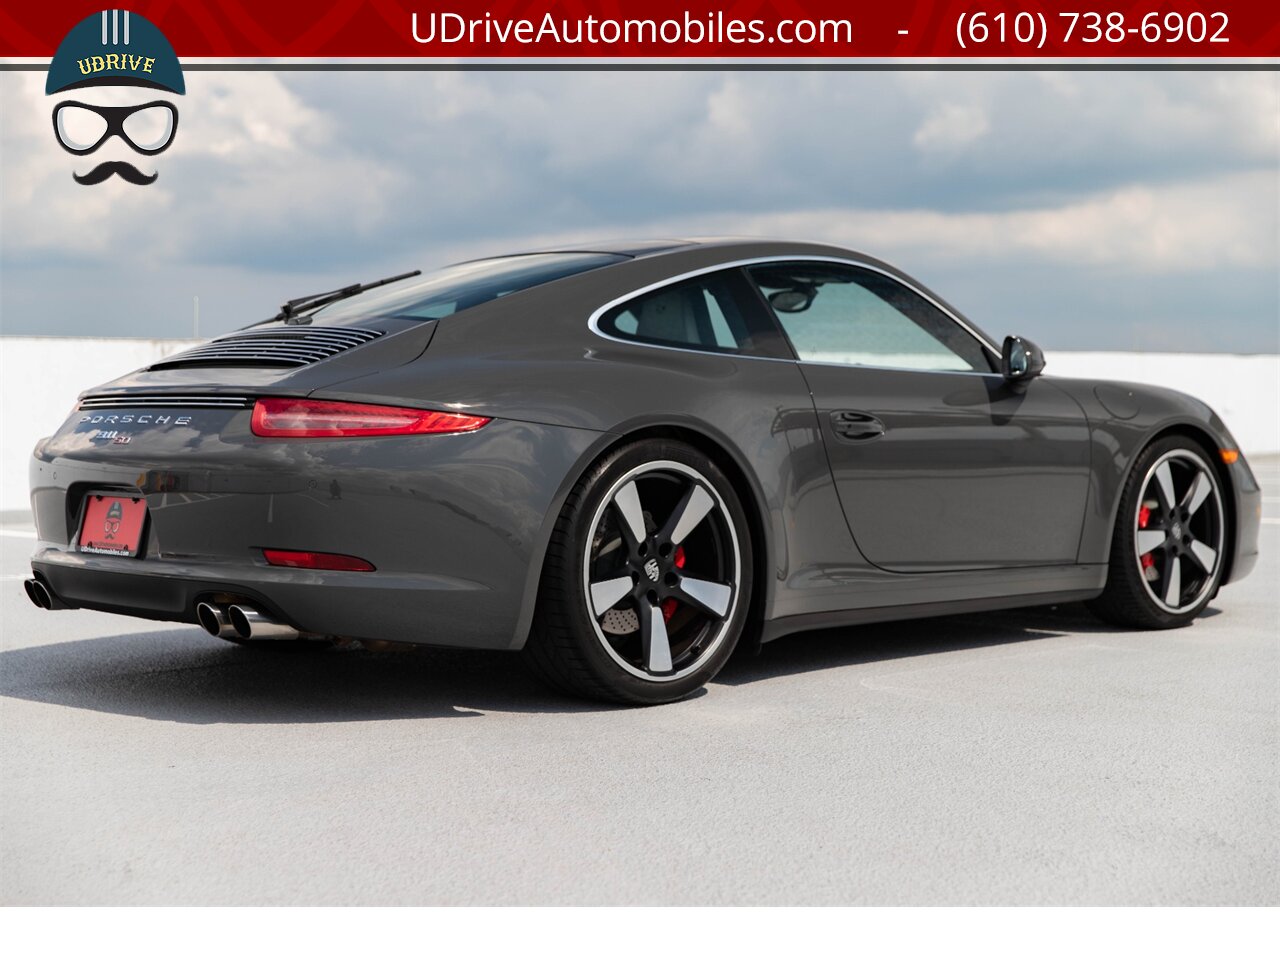 2014 Porsche 911 Carrera S 50th Anniversary Edition Certified  CPO Warranty thru 12/26/21 Full Front End Clear Film - Photo 16 - West Chester, PA 19382